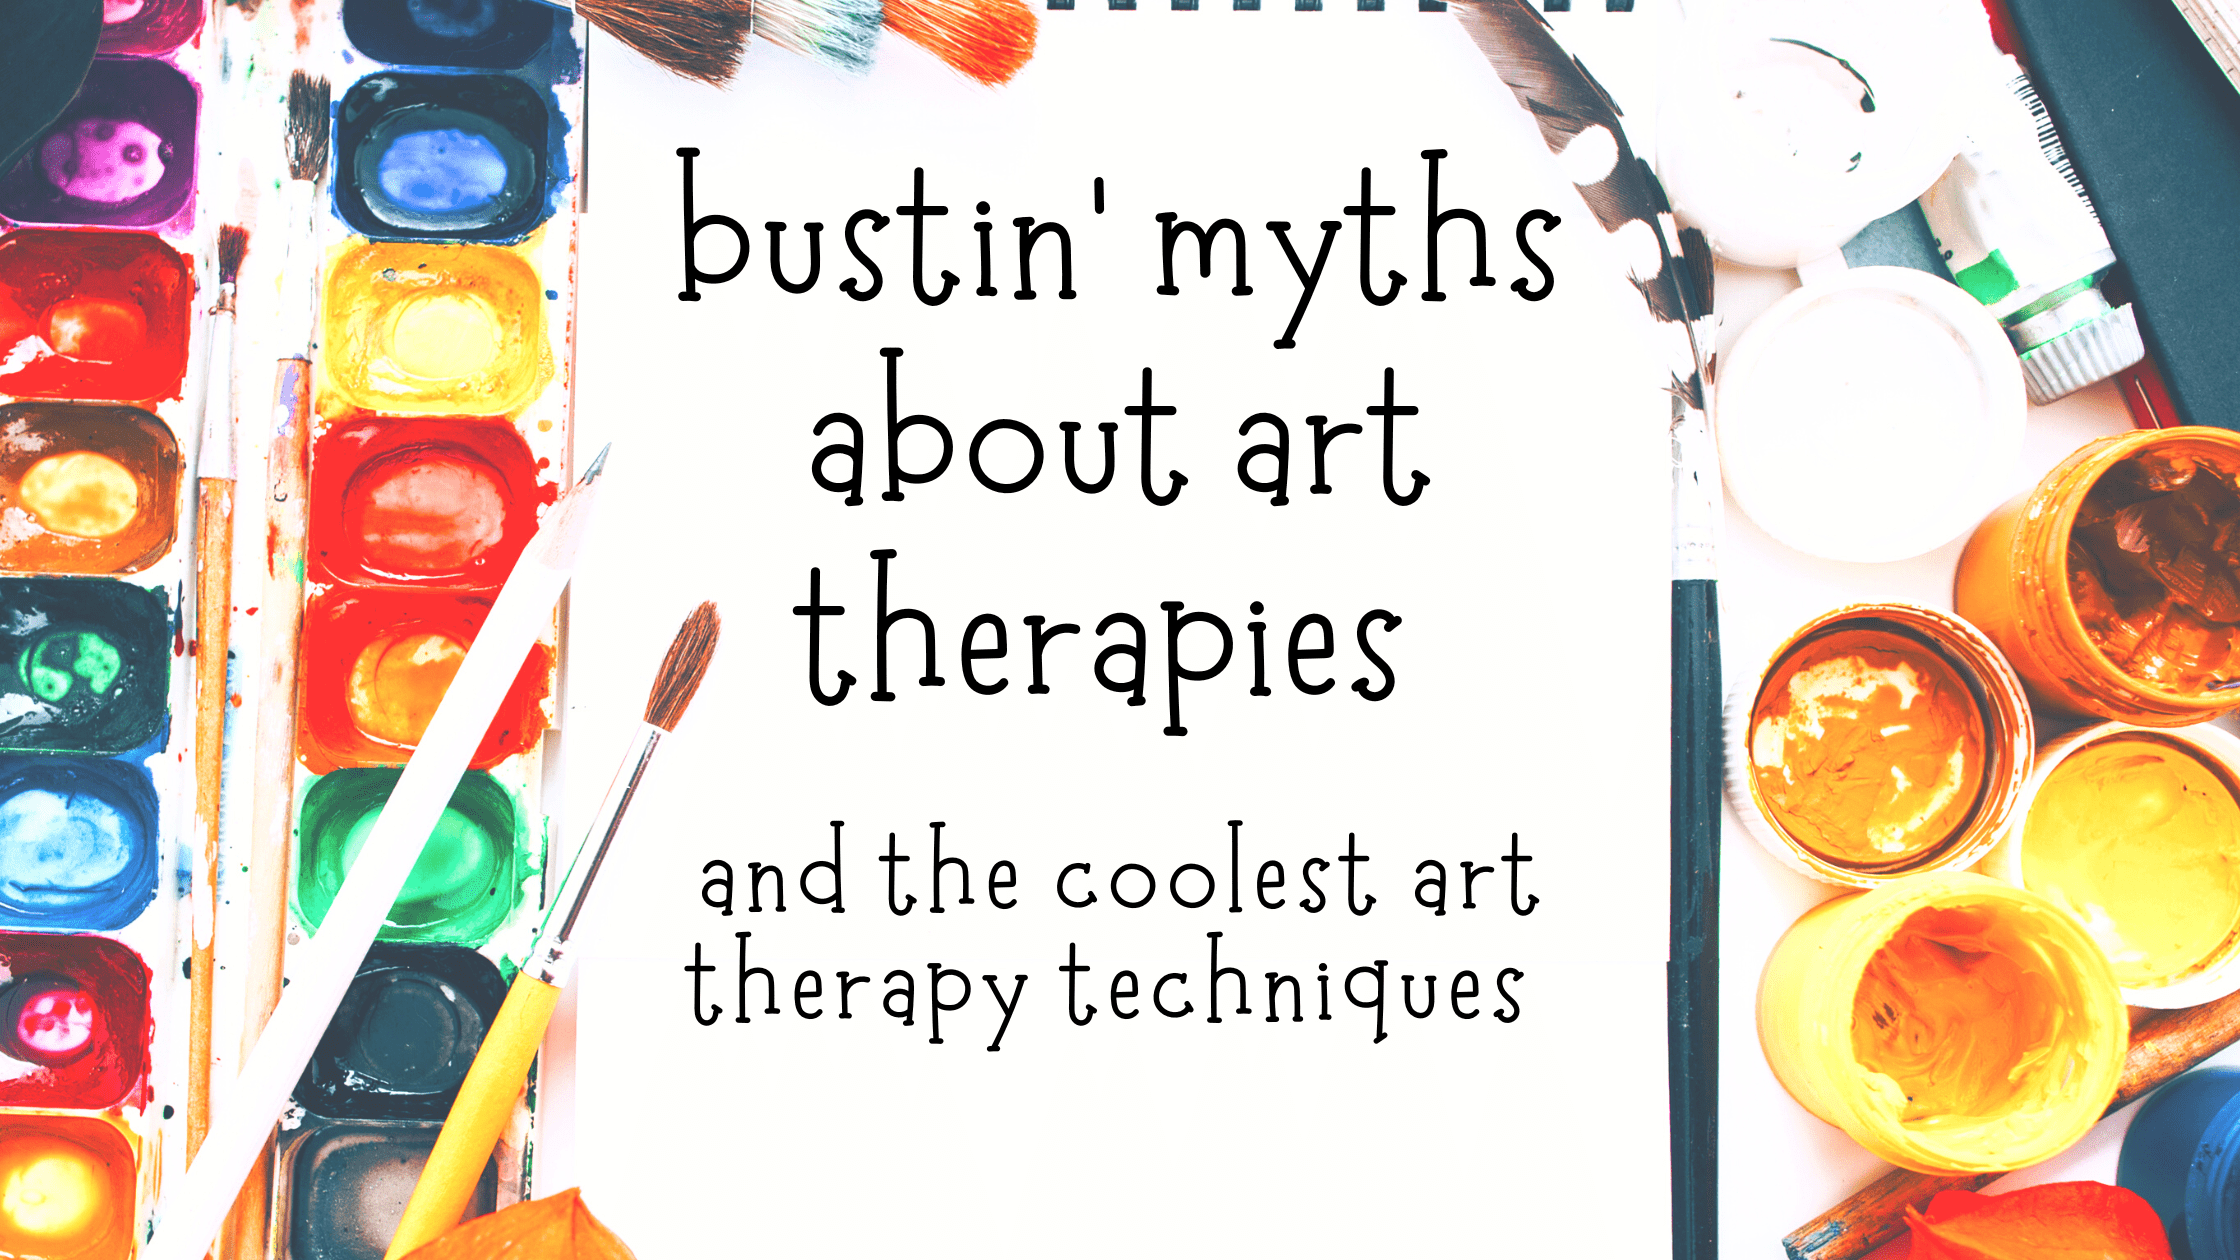 art therapies, Art Therapy, Art Therapy Activities, what is Art Therapy, Art Therapy helps kids, Art Therapy for children,